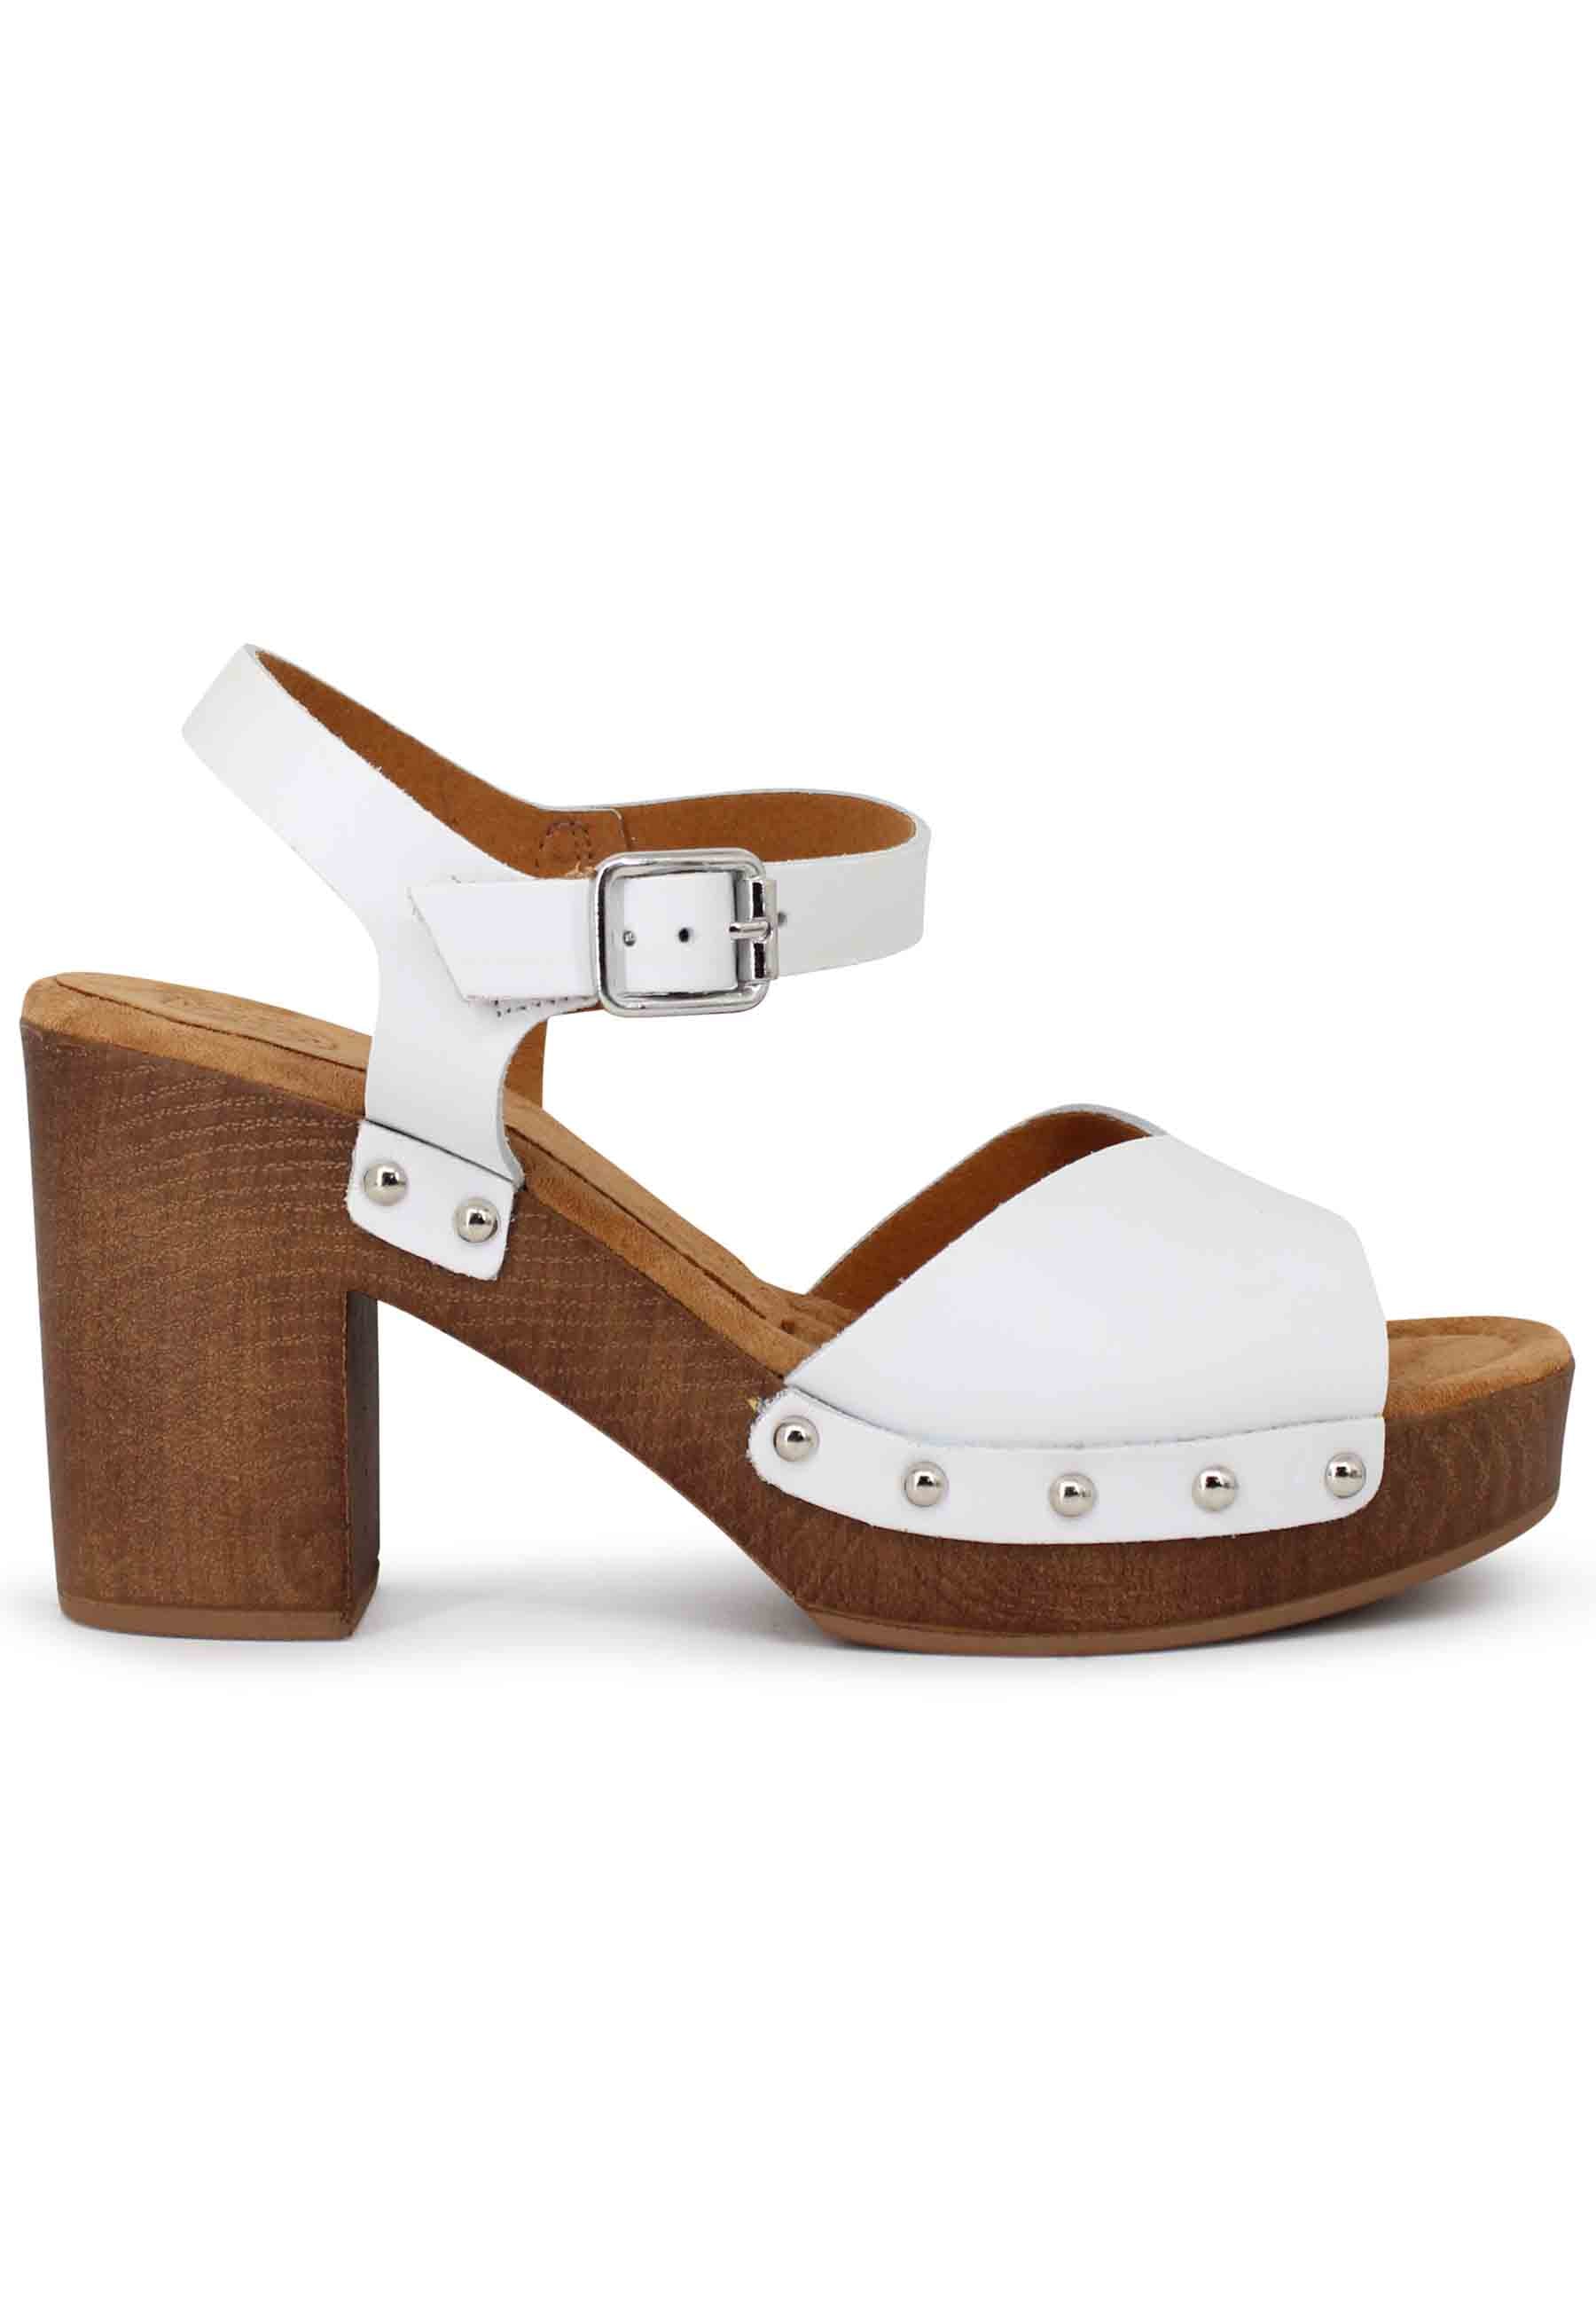 Women's high heel white leather clog sandals